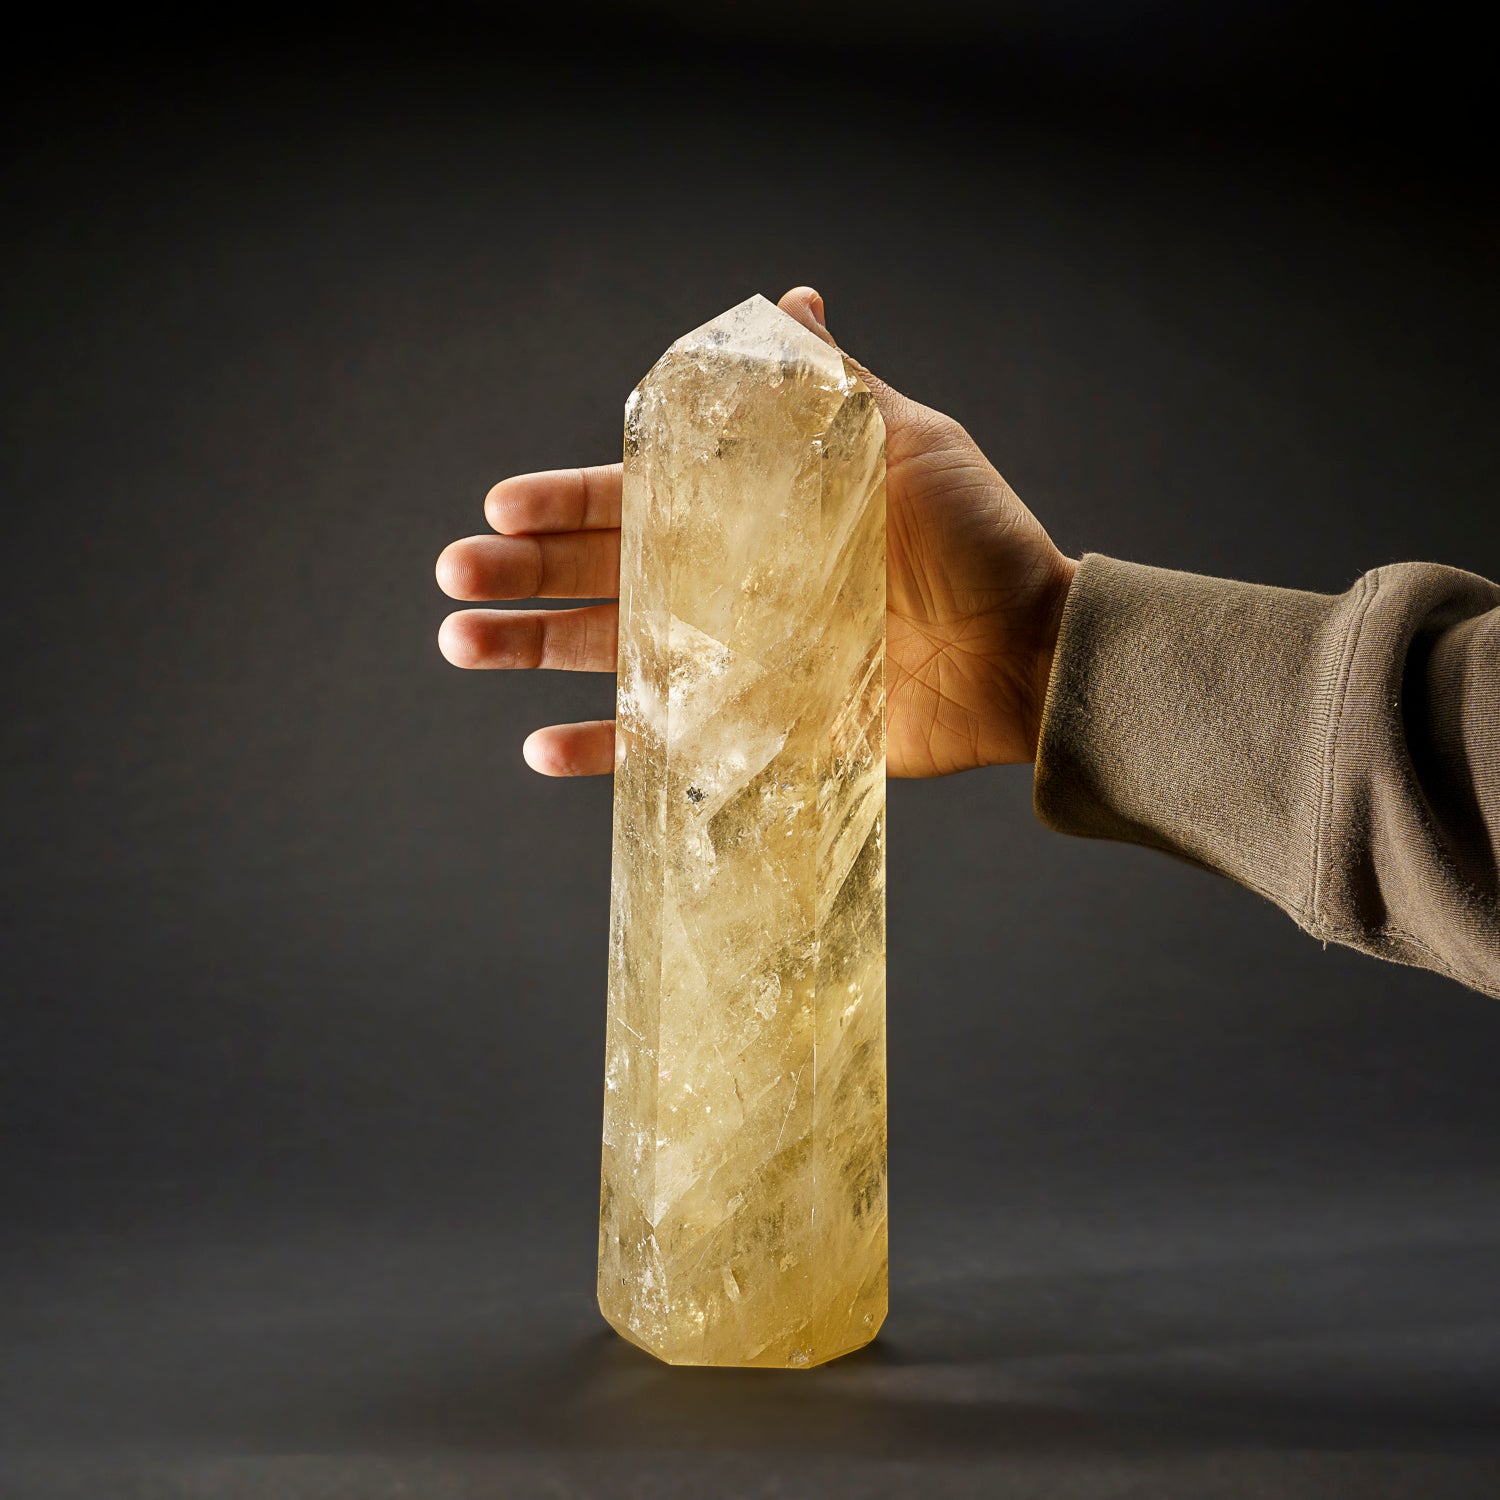 Genuine polished Citrine Crystal Point from Brazil (5.5 lbs)